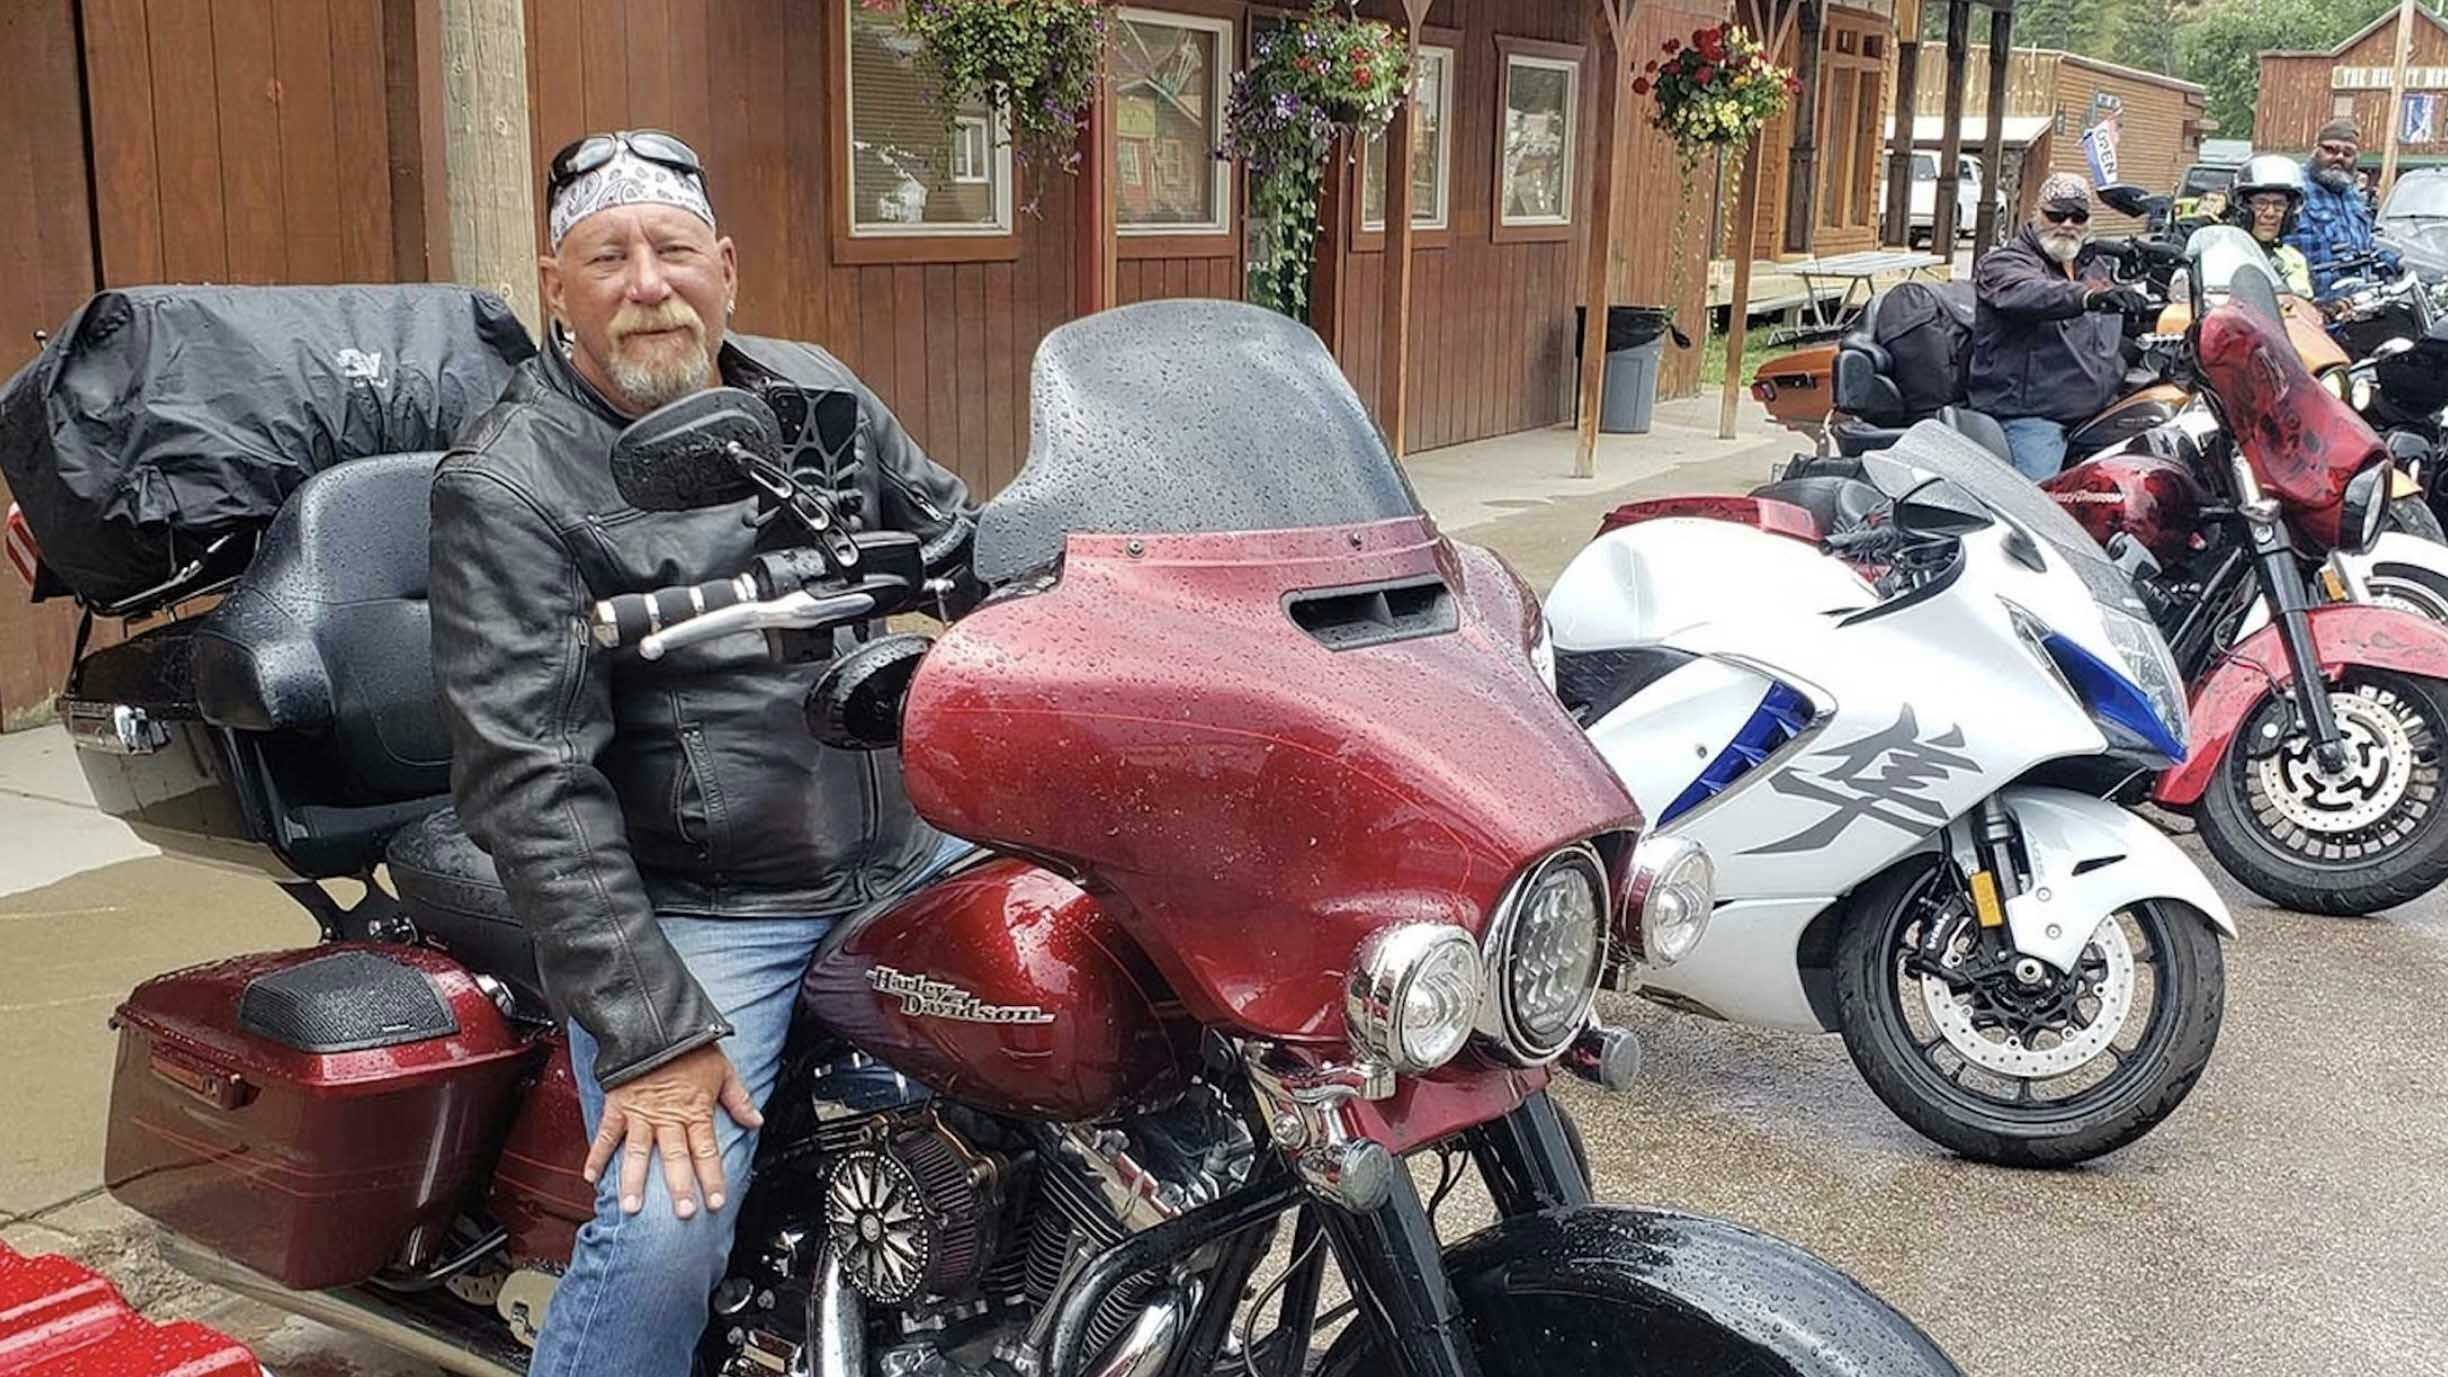 Jeff G started out last week in South Dakota took a trip through Glacier National Park, and now he's headed back to Sturgis with plans to stop in for about one day of the rally before heading back home.